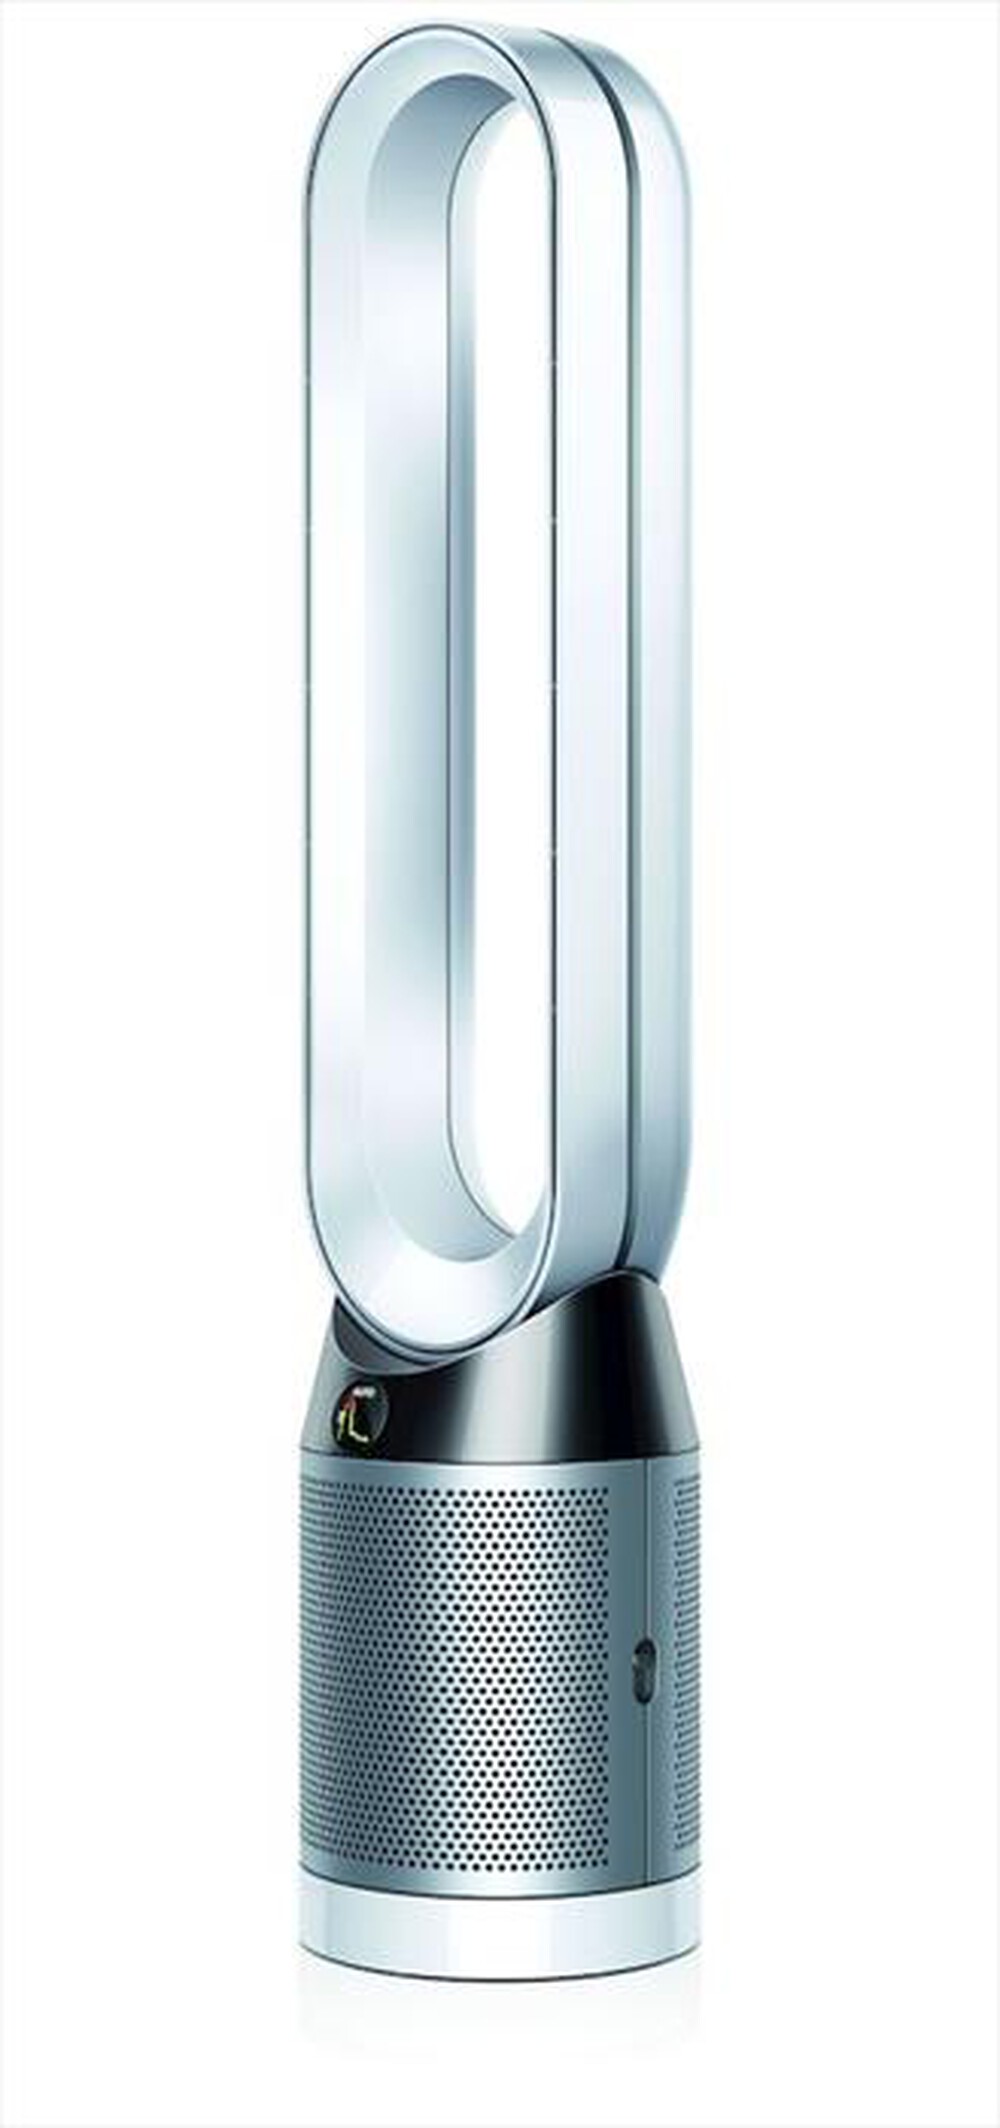 "DYSON - PURE COOL TOWER NEW"